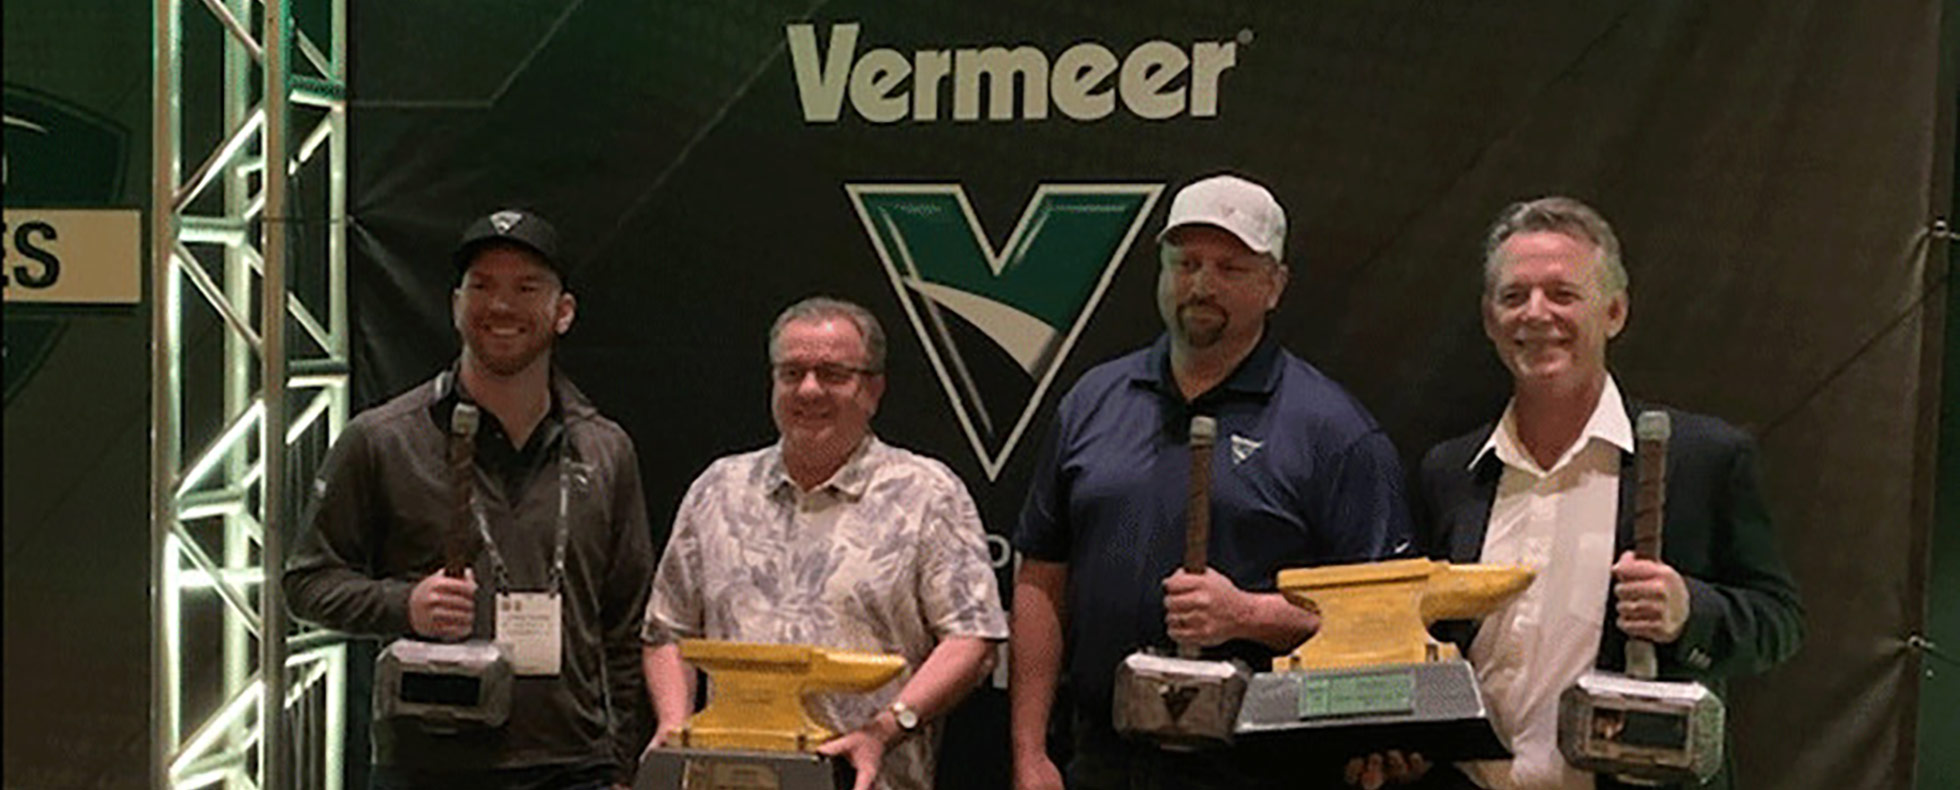 RDO Equipment Co. Team Members Honored with Awards at Annual Vermeer Meeting